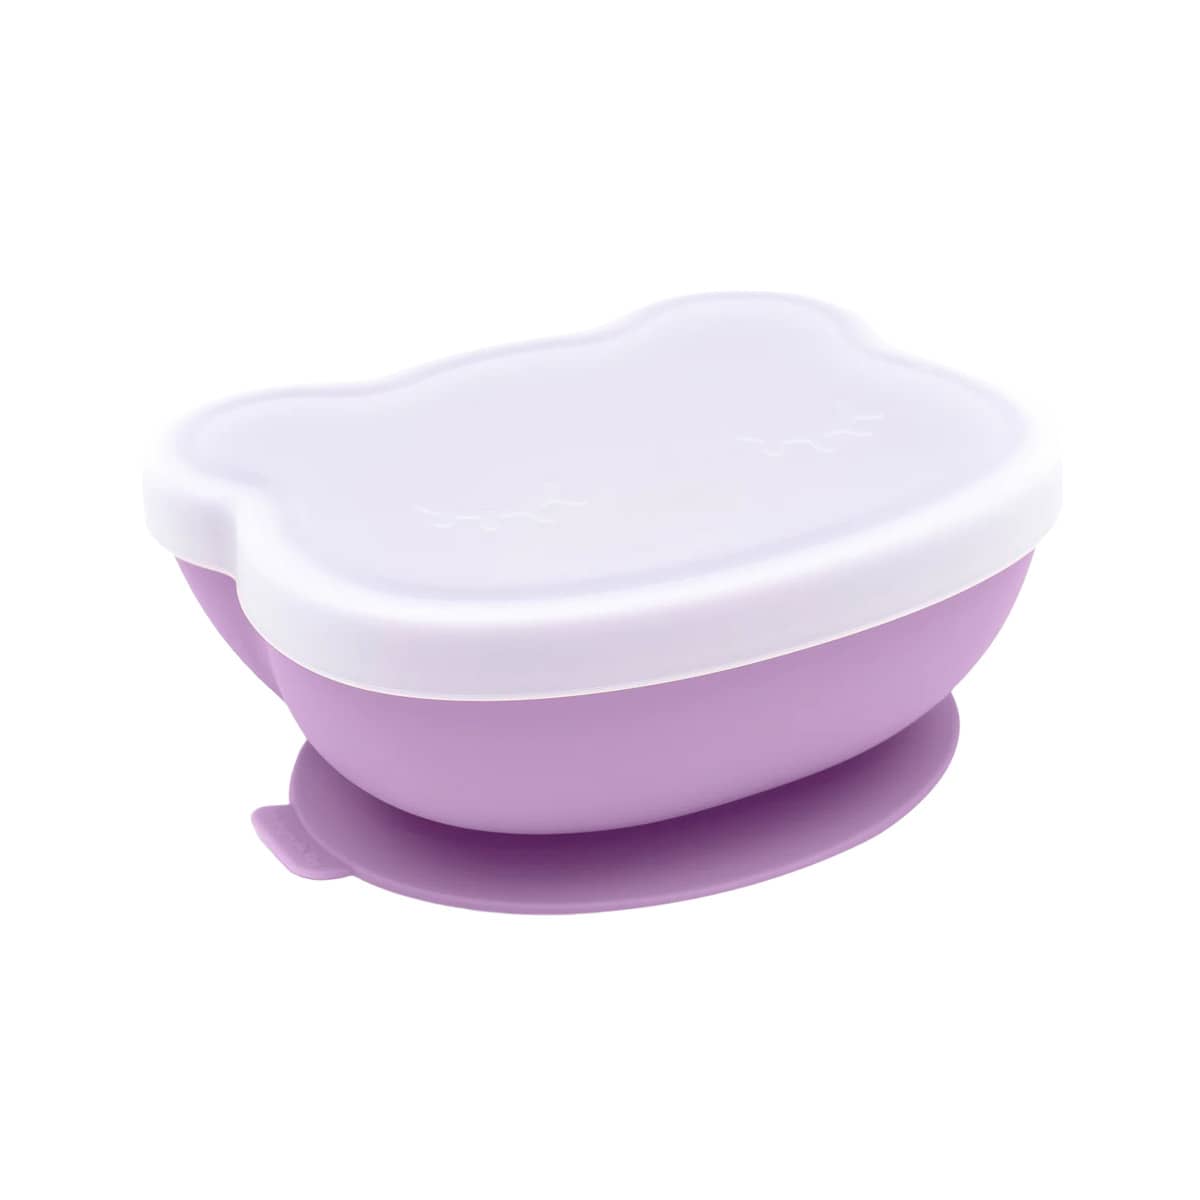 We Might Be Tiny Stickie Silicone Bowl - Lilac